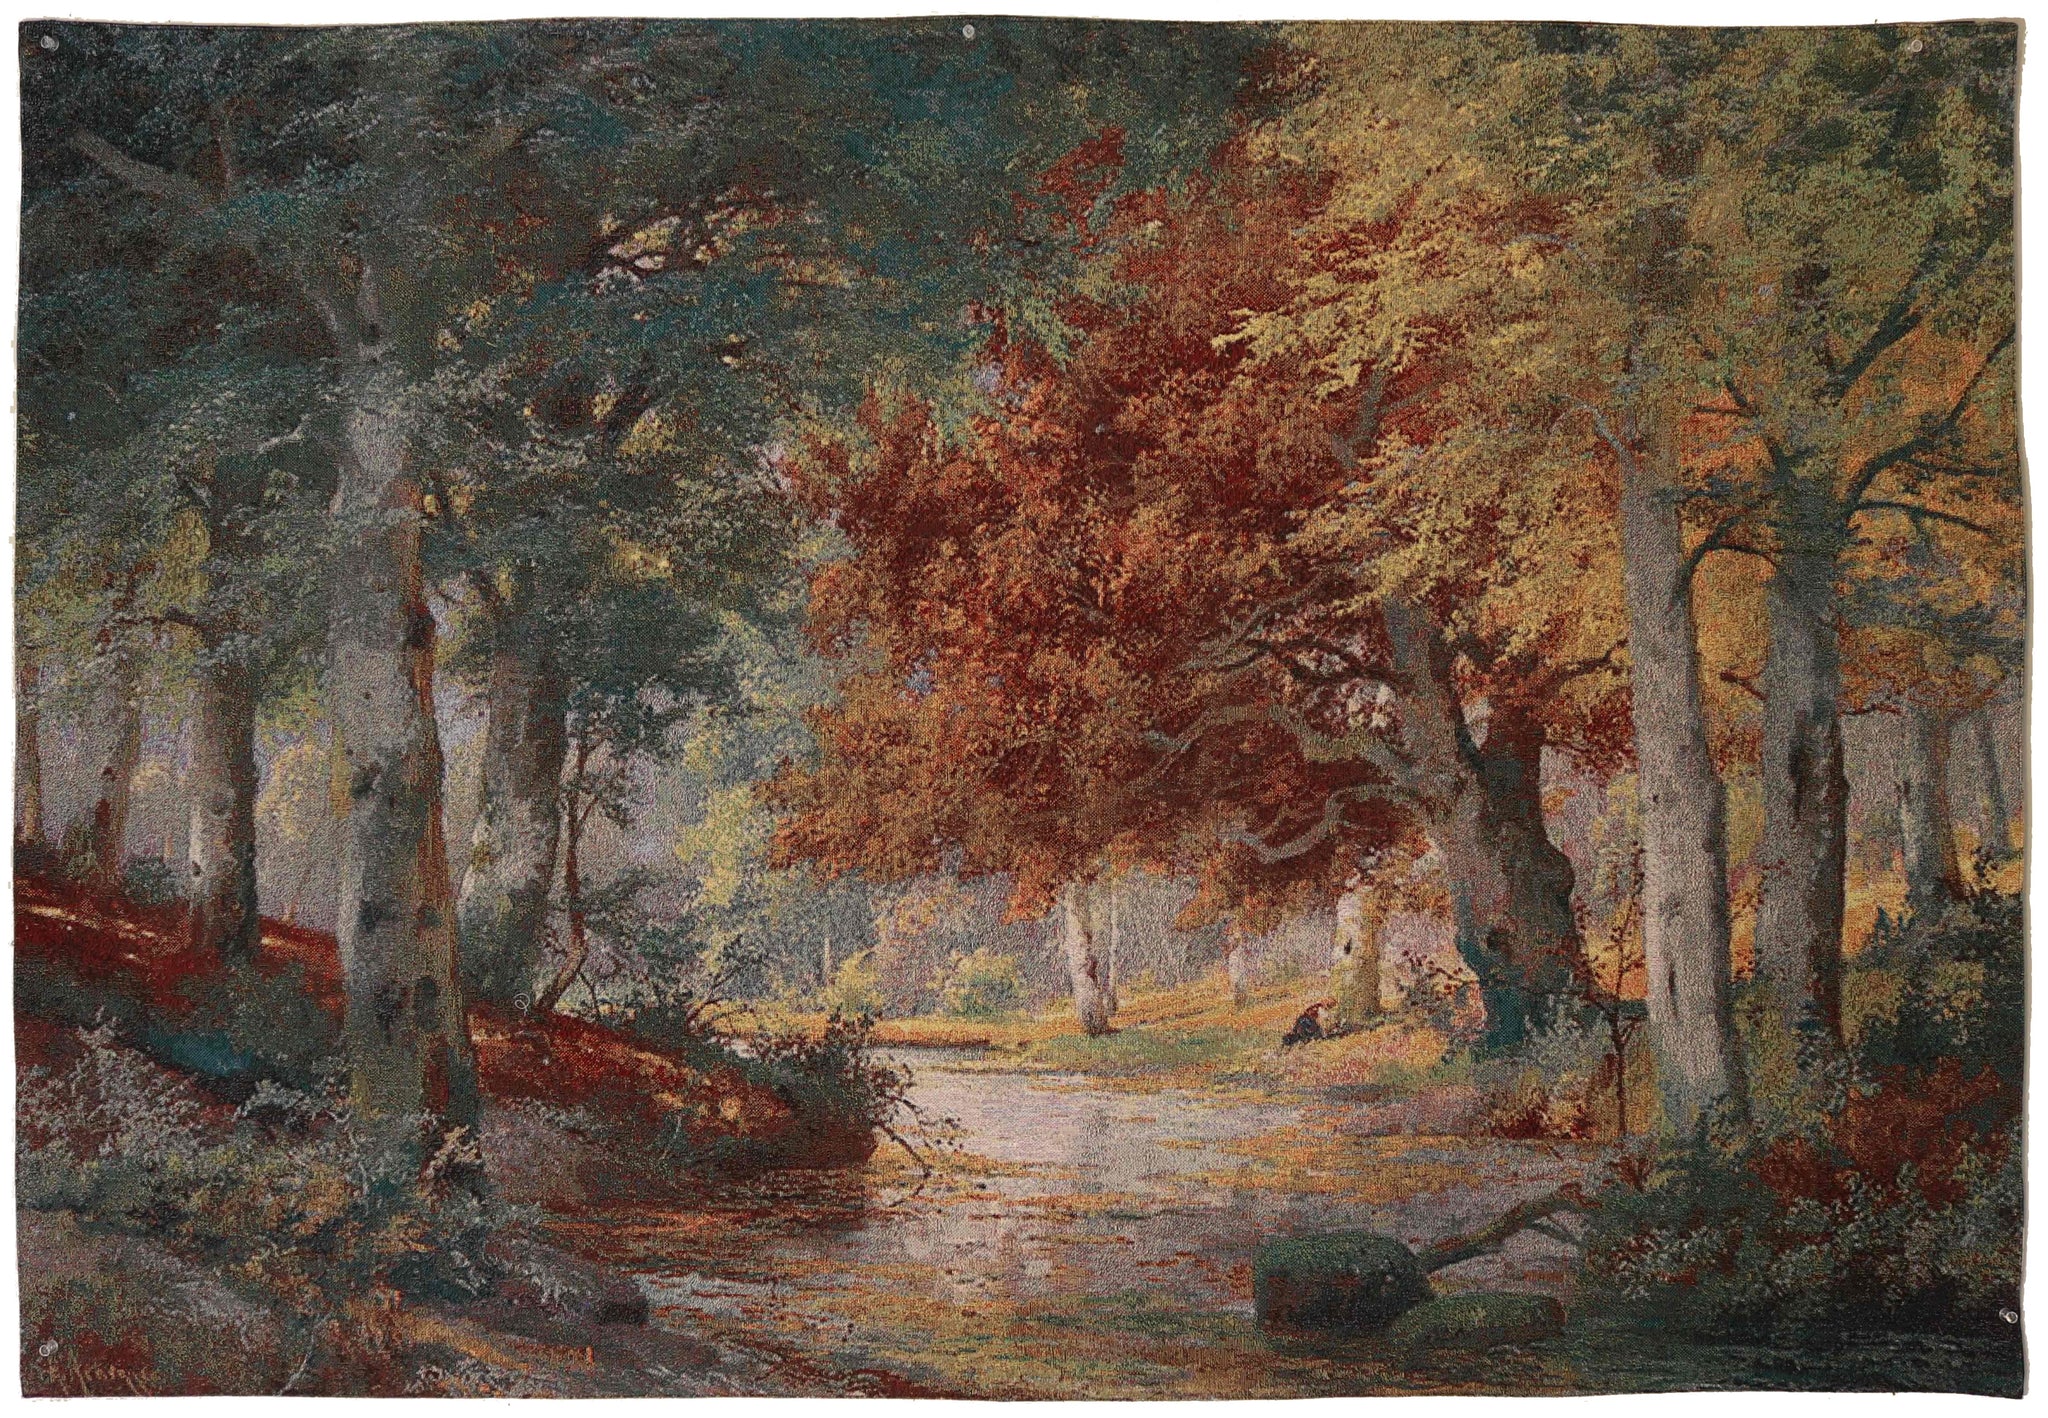 WH-FORRFALL  Wall Hanging-Fall in the Forest W139 x H96 CM (W54.7 x H37.8 INCH)